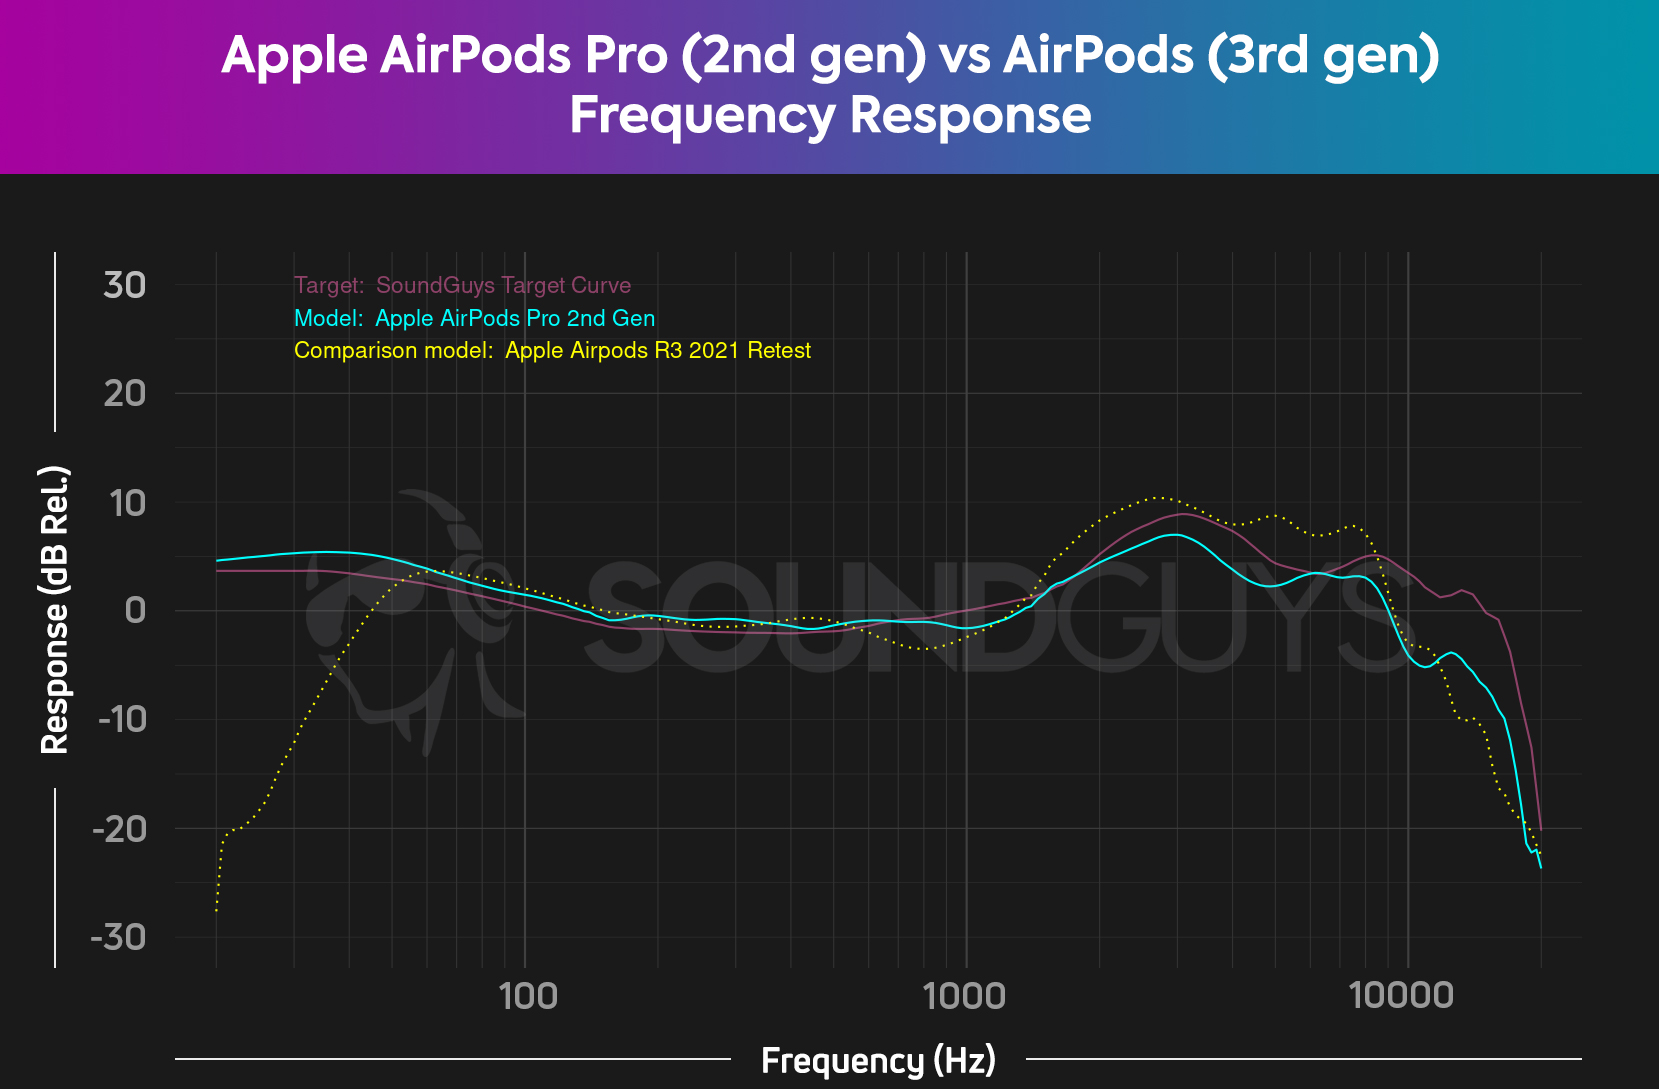 A chart compares the Apple AirPods Pro (2nd gen) vs AirPods (3rd generation) frequency responses.